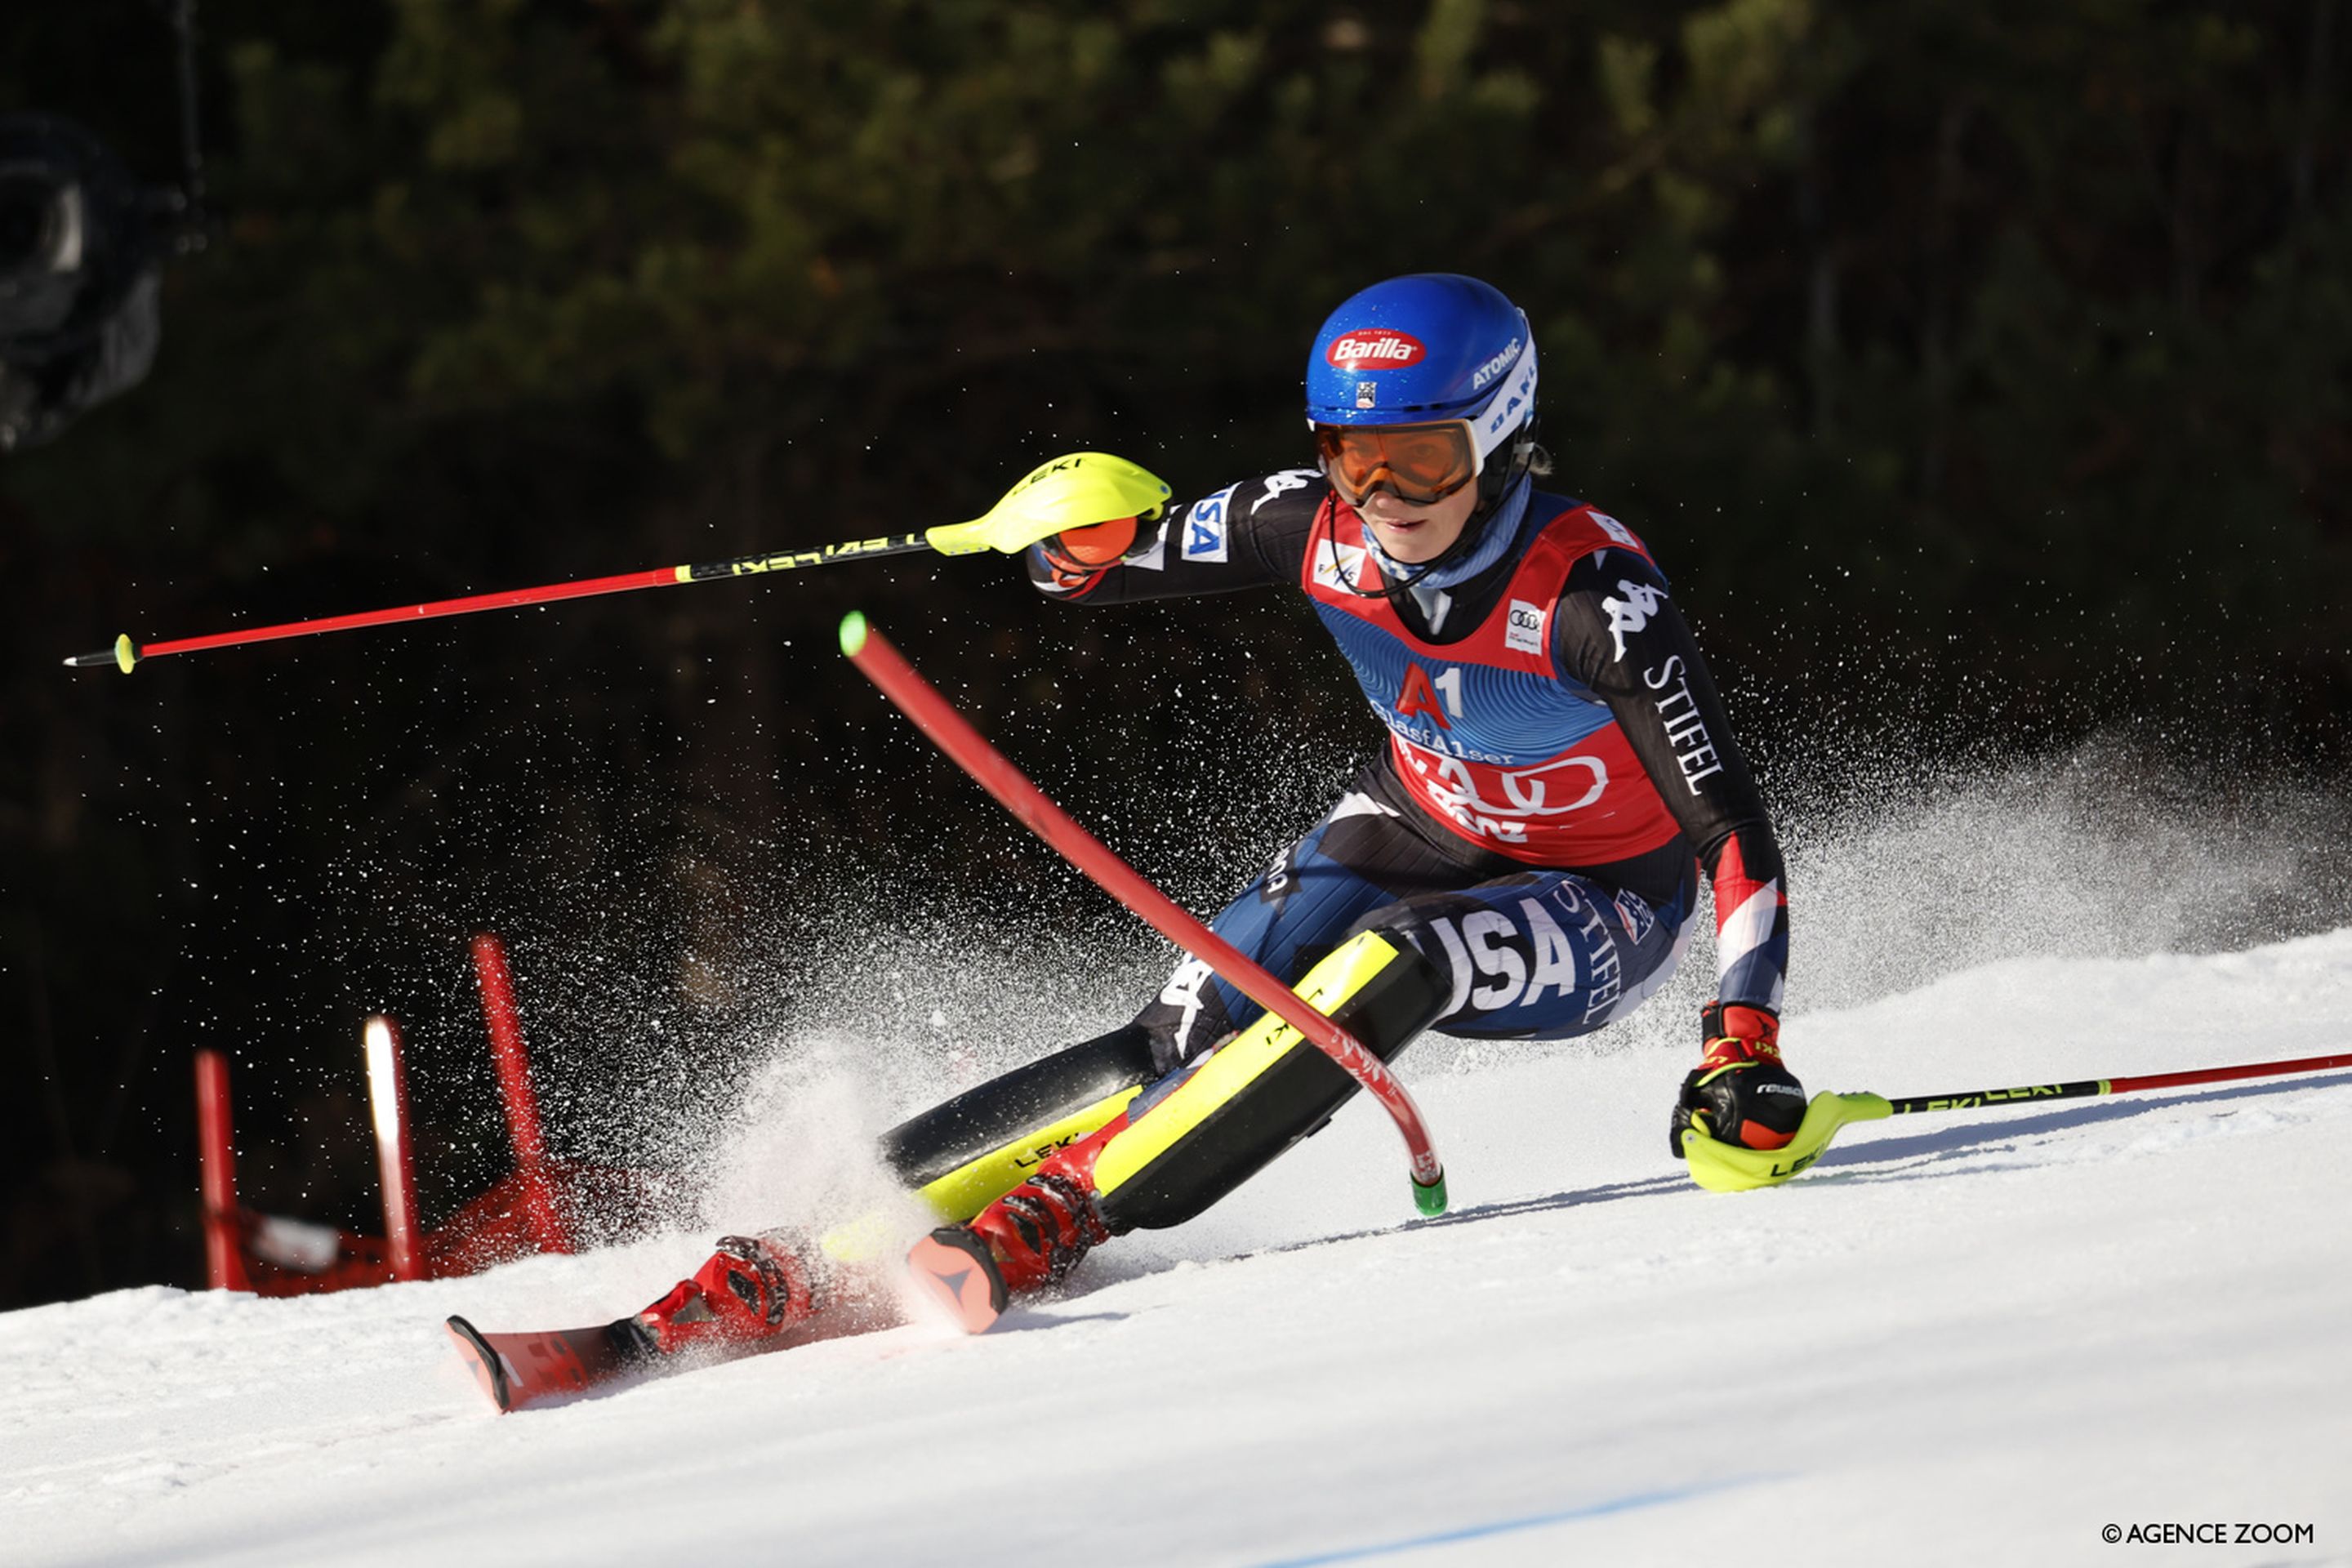 Mikaela Shiffrin (USA) in complete control in dominating the Lienz slalom on Friday (Agence Zoom)